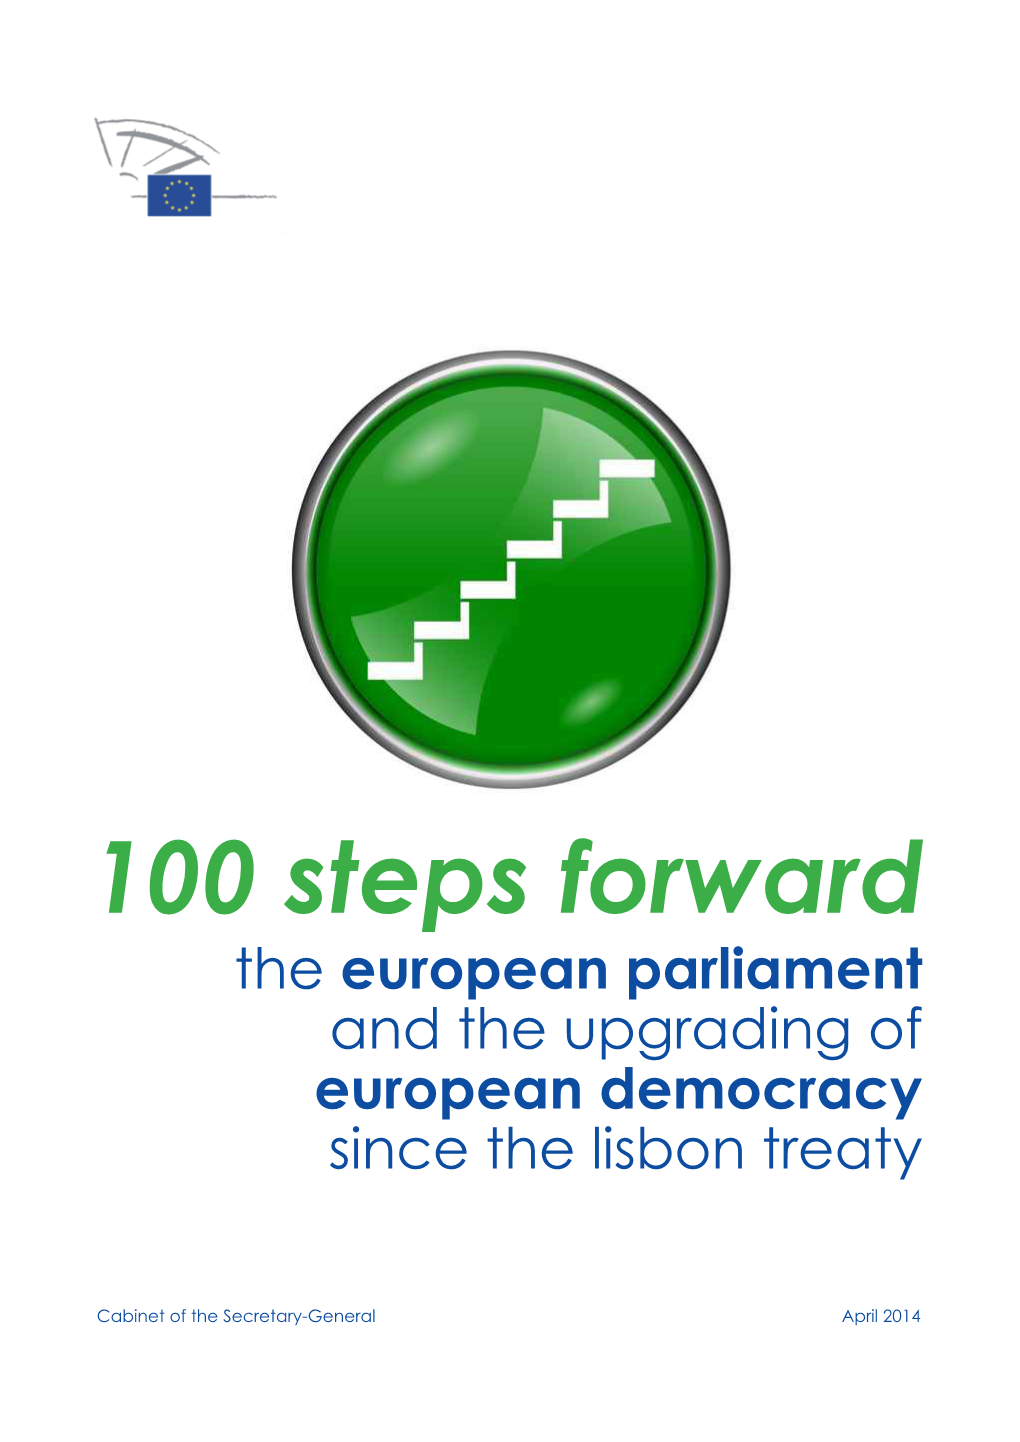 100 Steps Forward the European Parliament and the Upgrading of European Democracy Since the Lisbon Treaty